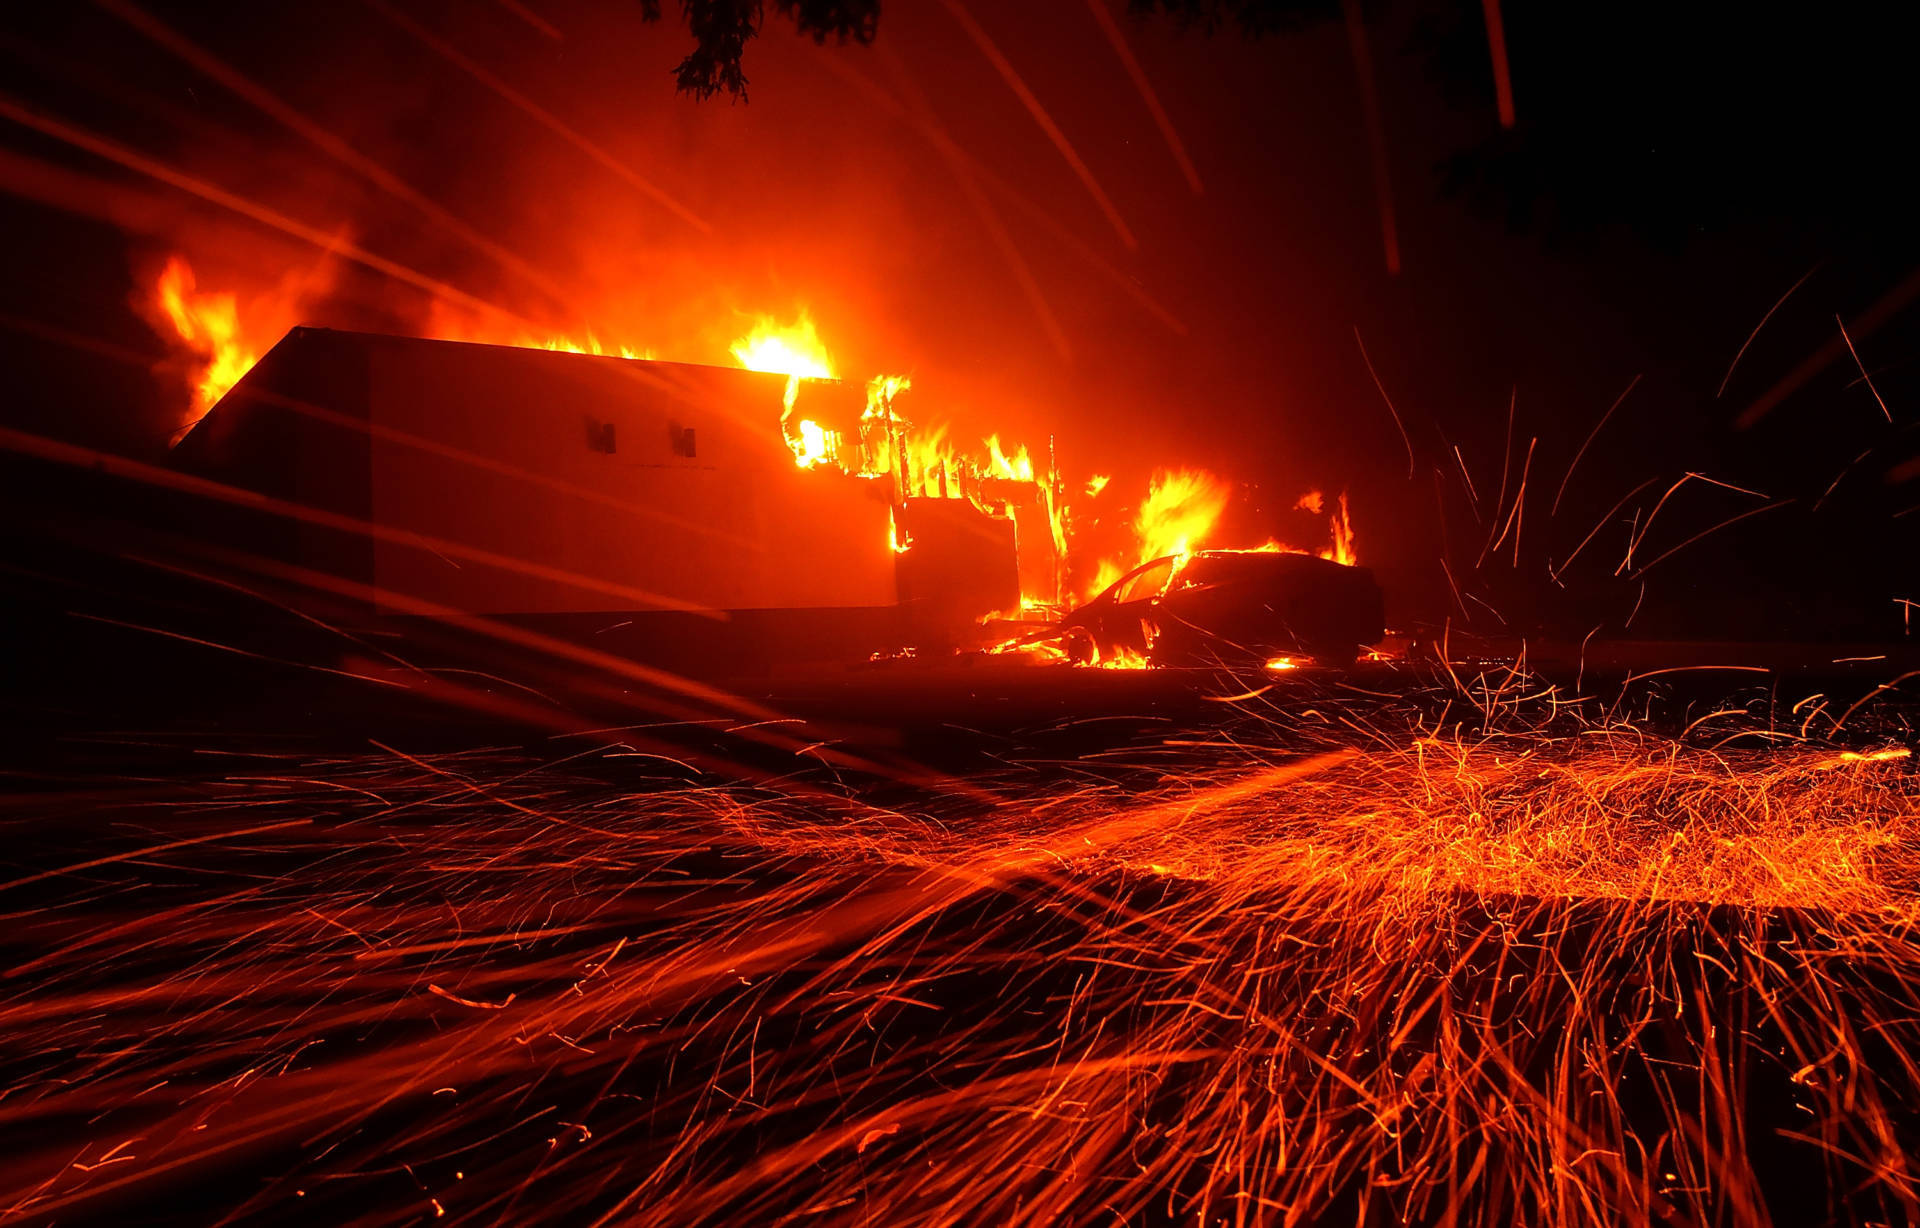 Embers blew in the wind as the Camp Fire burned a KFC restaurant Thursday night in the Butte County town of Paradise. Justin Sullivan/Getty Images